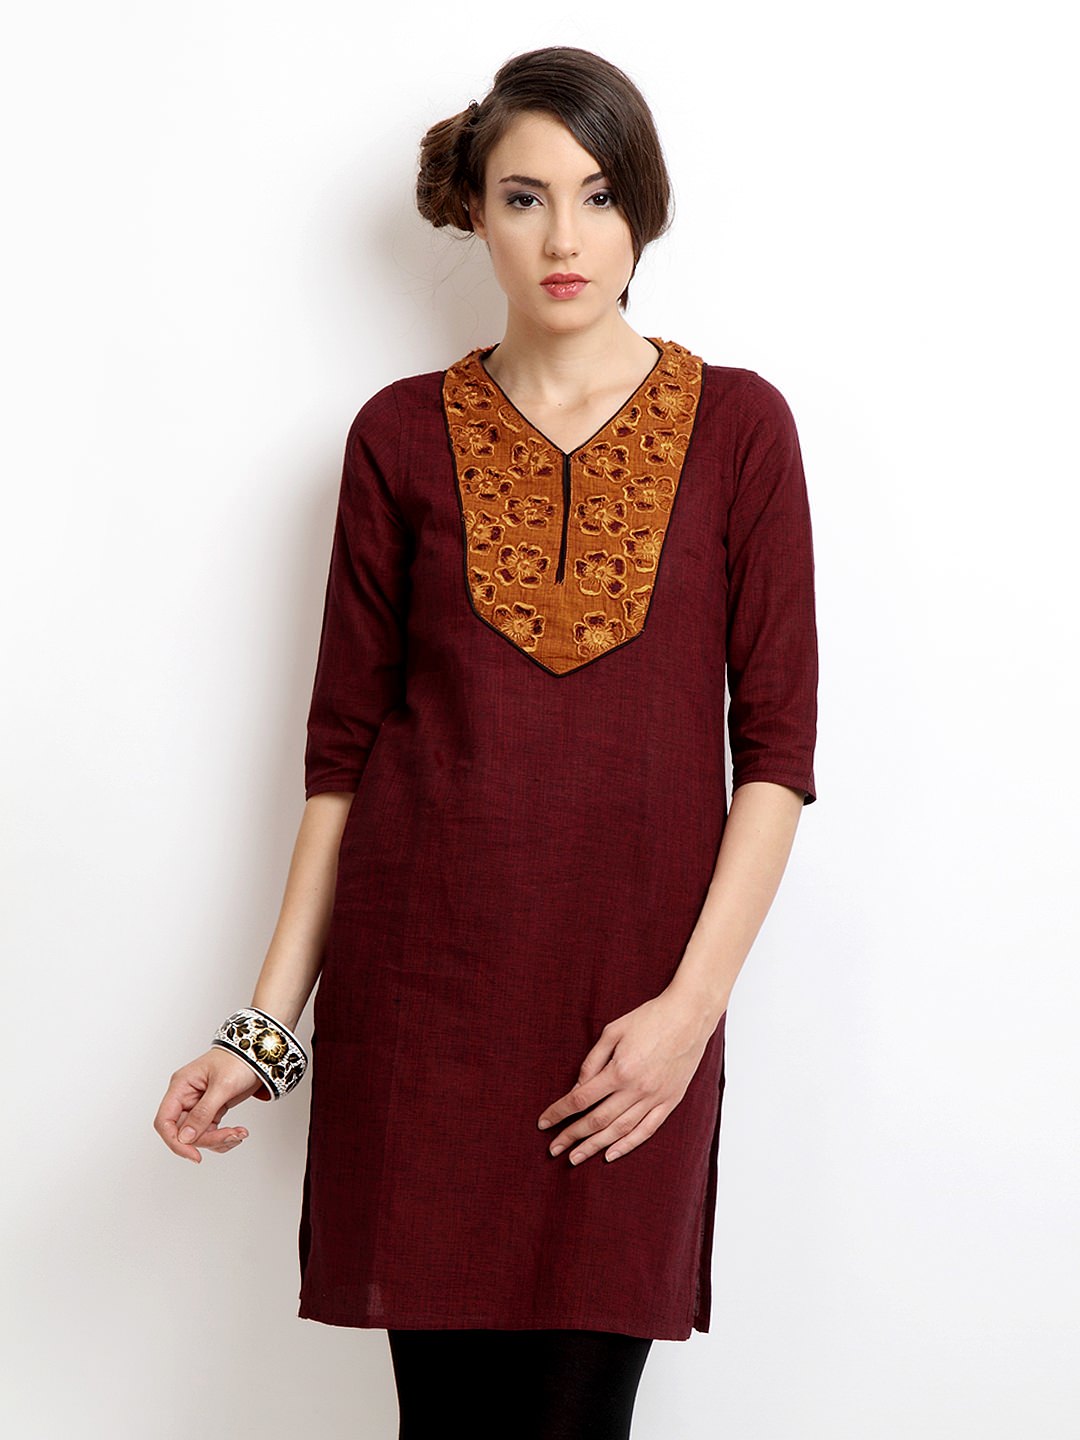 Alma Women Maroon Embroidered Kurta (Perfect Gift For Women) Super Fast Delivery : Your Daughter, GF and Wife will have big Smile and Happiness